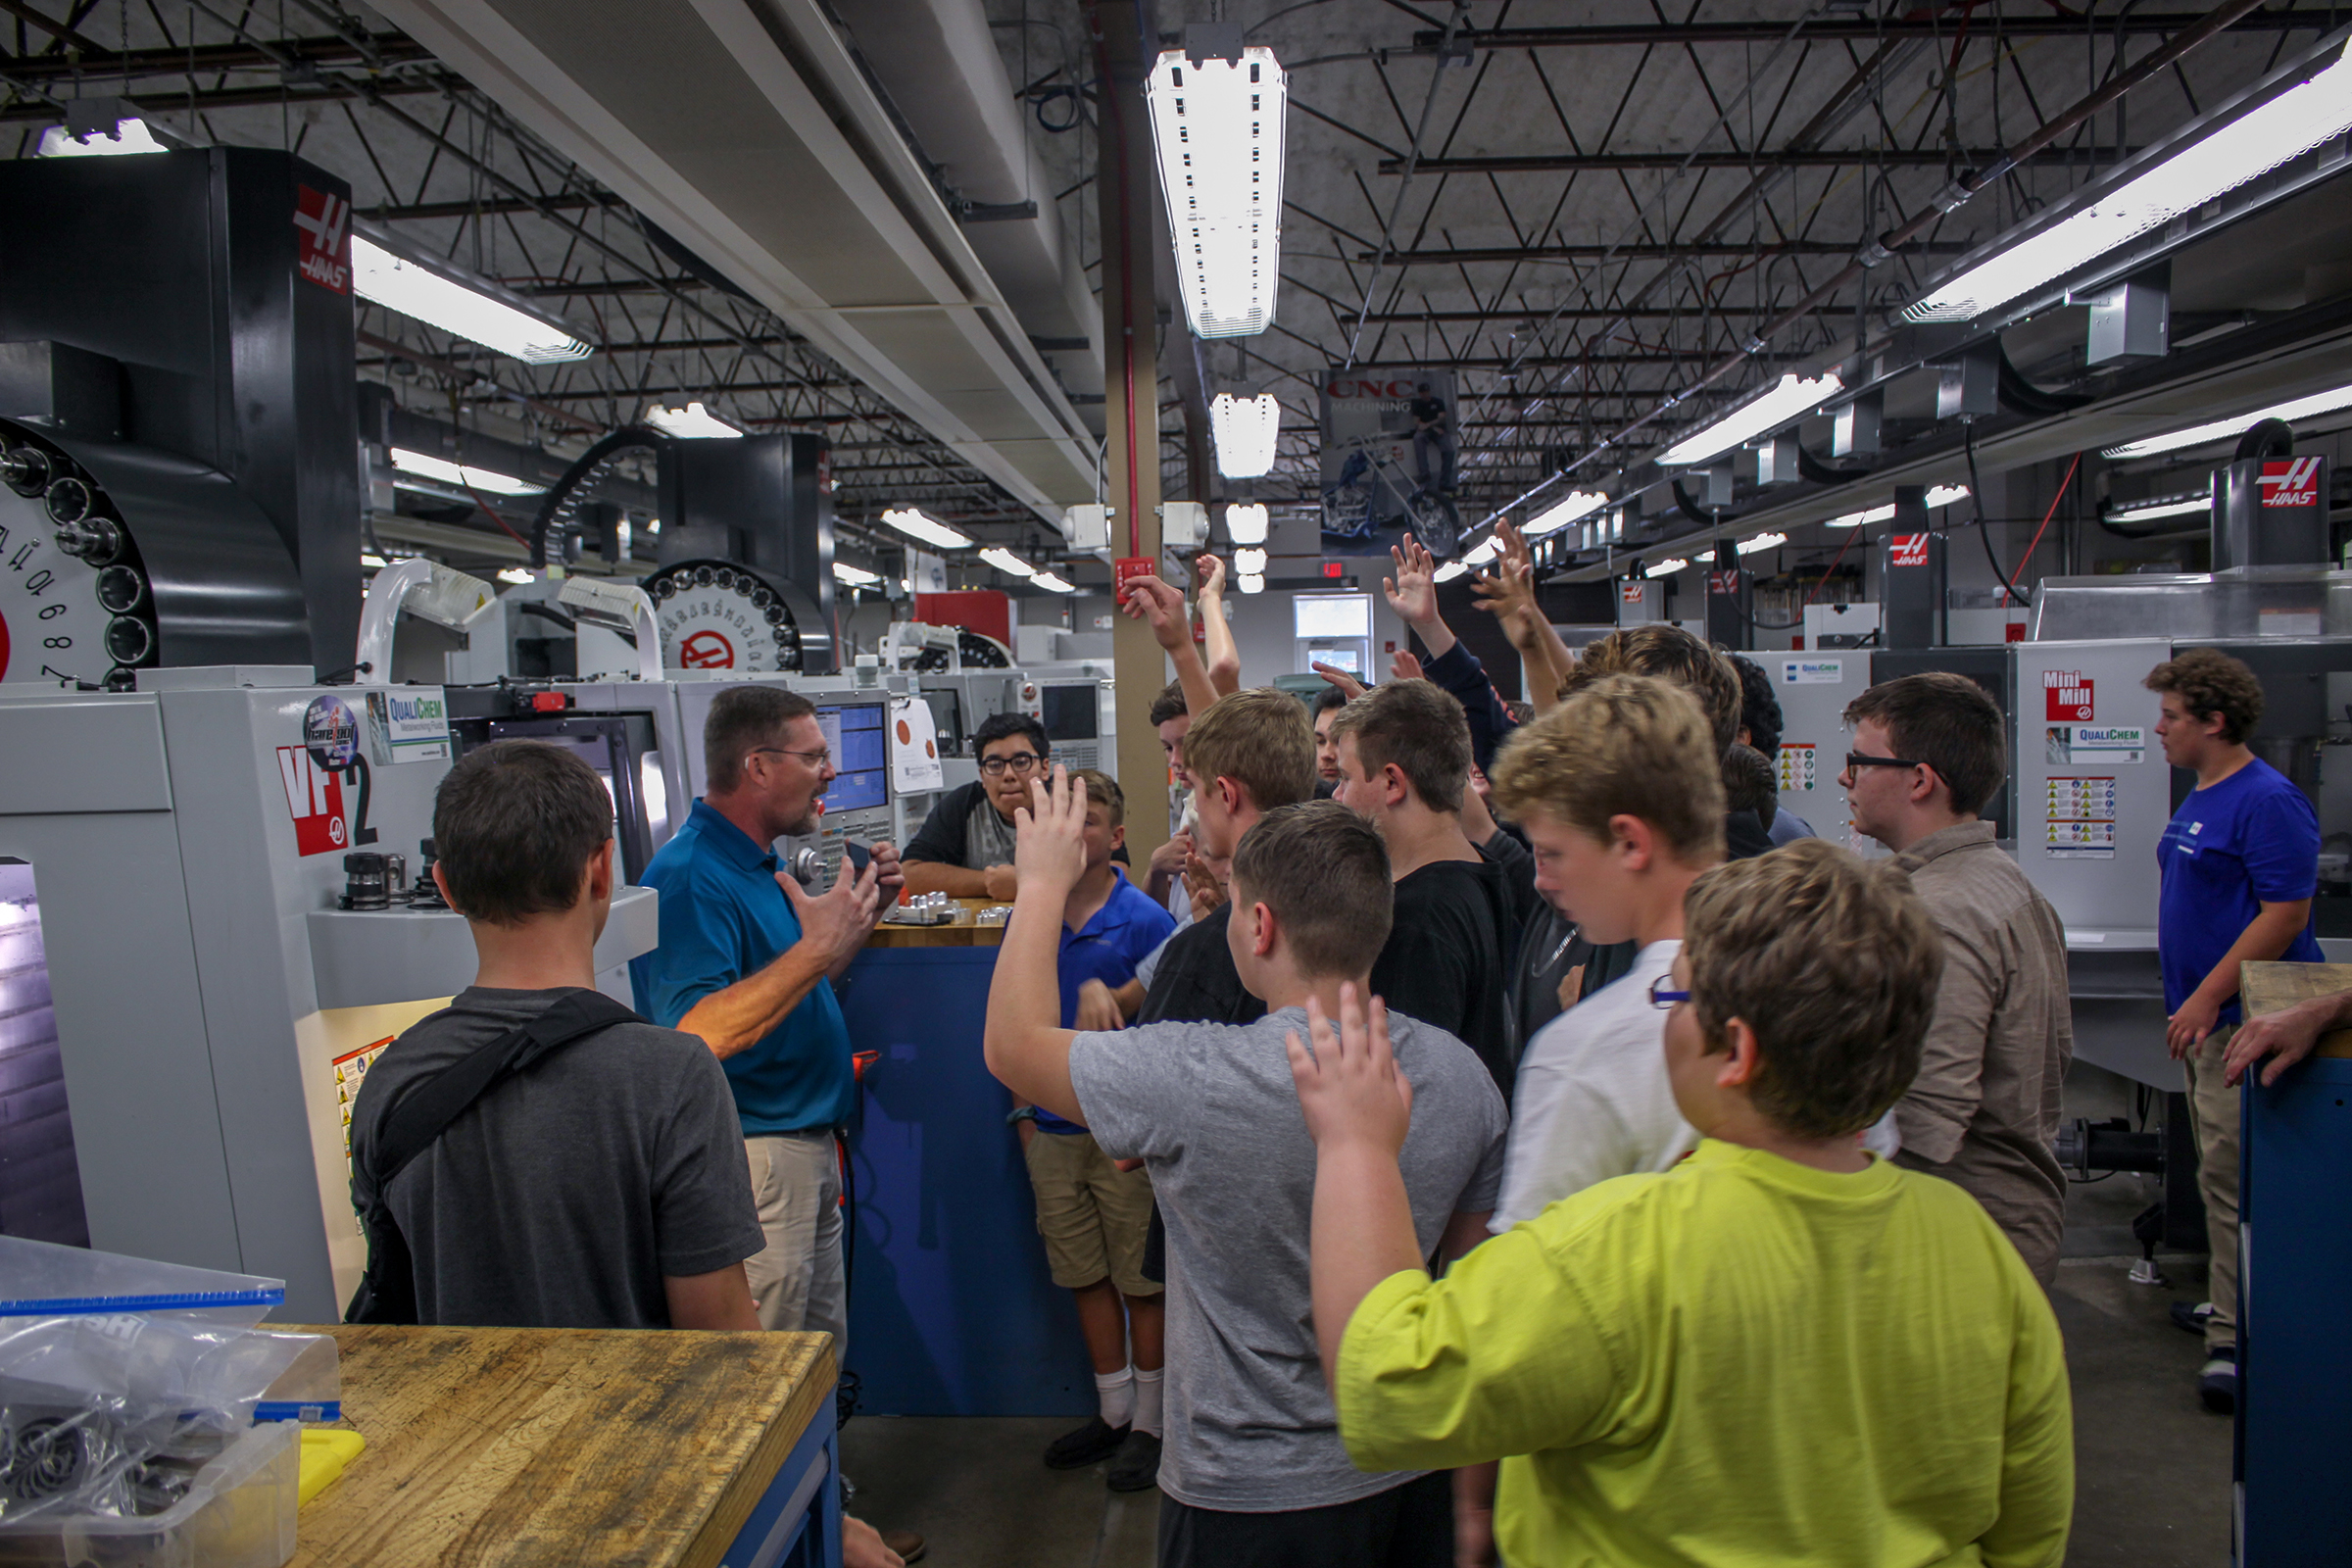 Industrial Programs Department Head Steve Maness speaks area eighth-grade students in the Gene Haas Computer-Integrated Machining Institute on the Asheboro Campus on Friday, Sept. 27. The students toured local industries before participating in hands-on activities in RCC’s machining, mechatronics, and welding labs as part of Manufacturing Day.